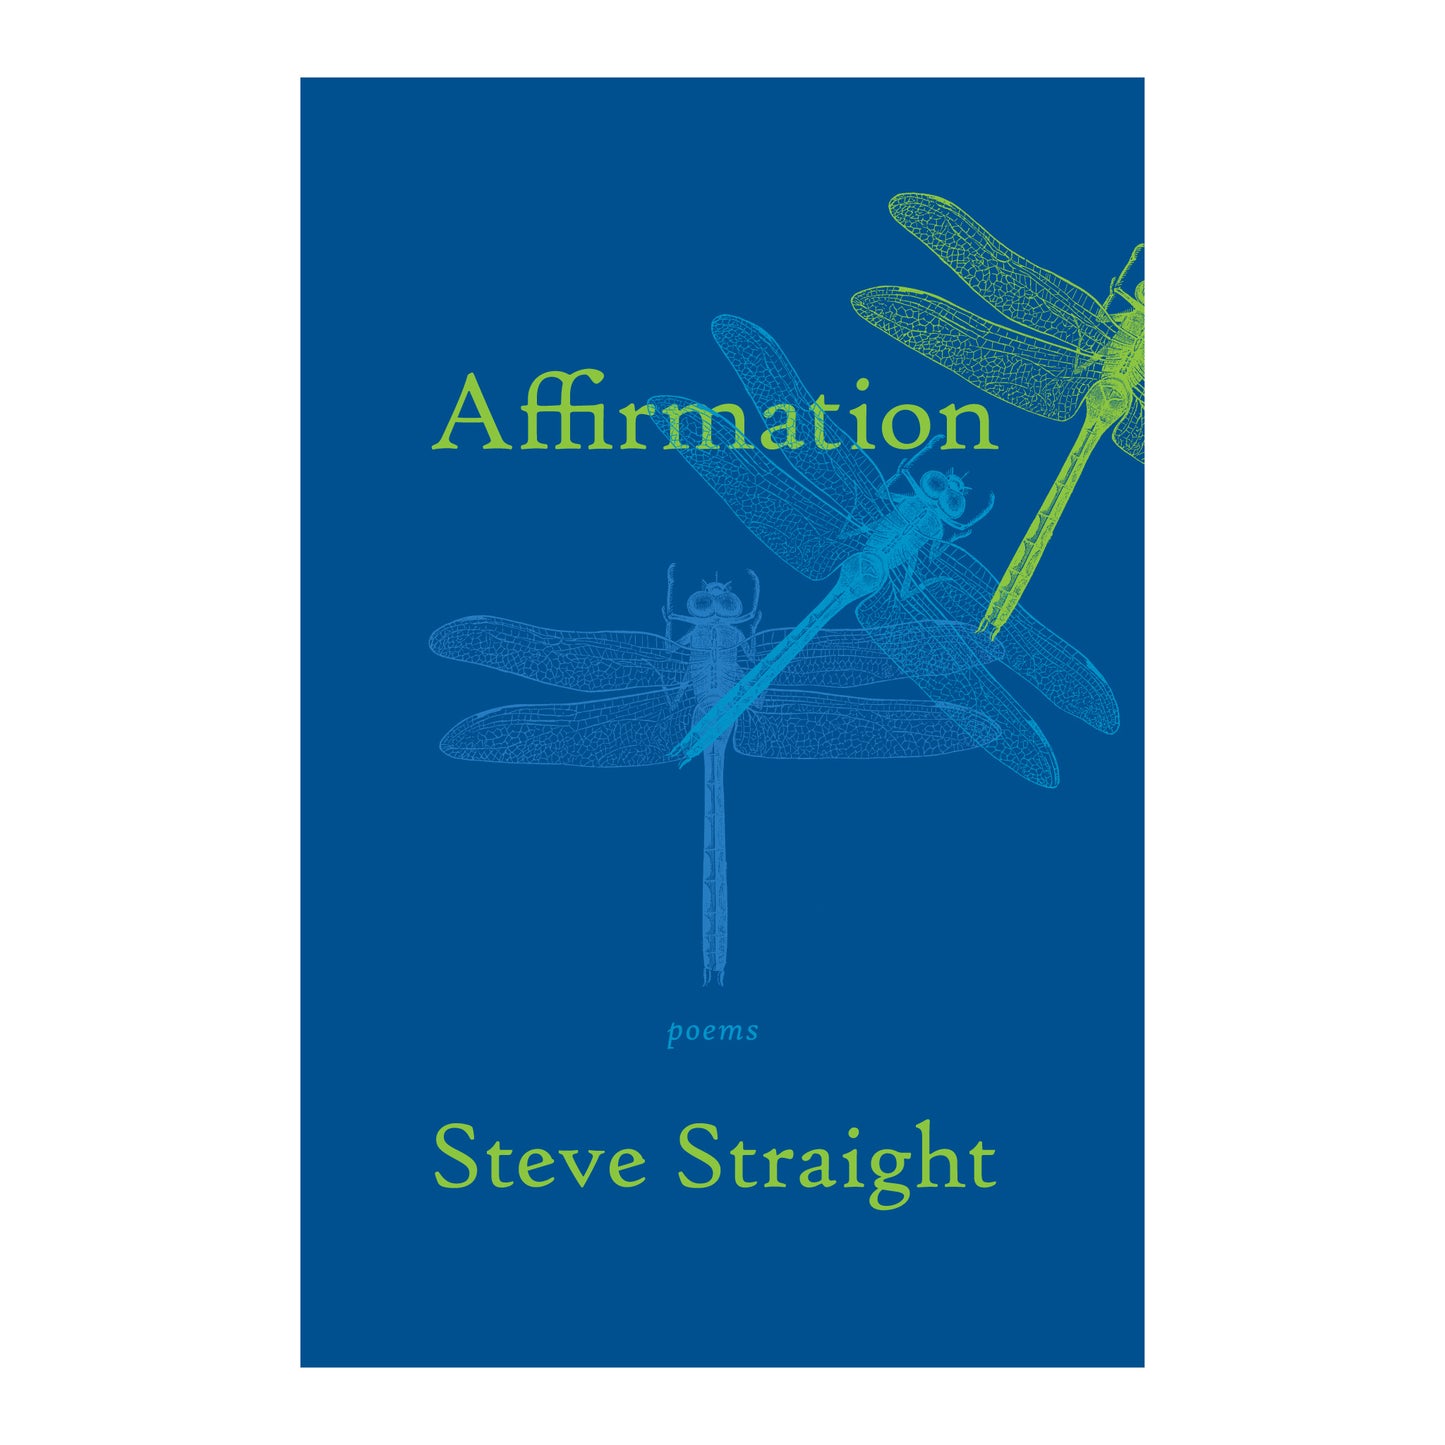 Affirmation by Steve Straight